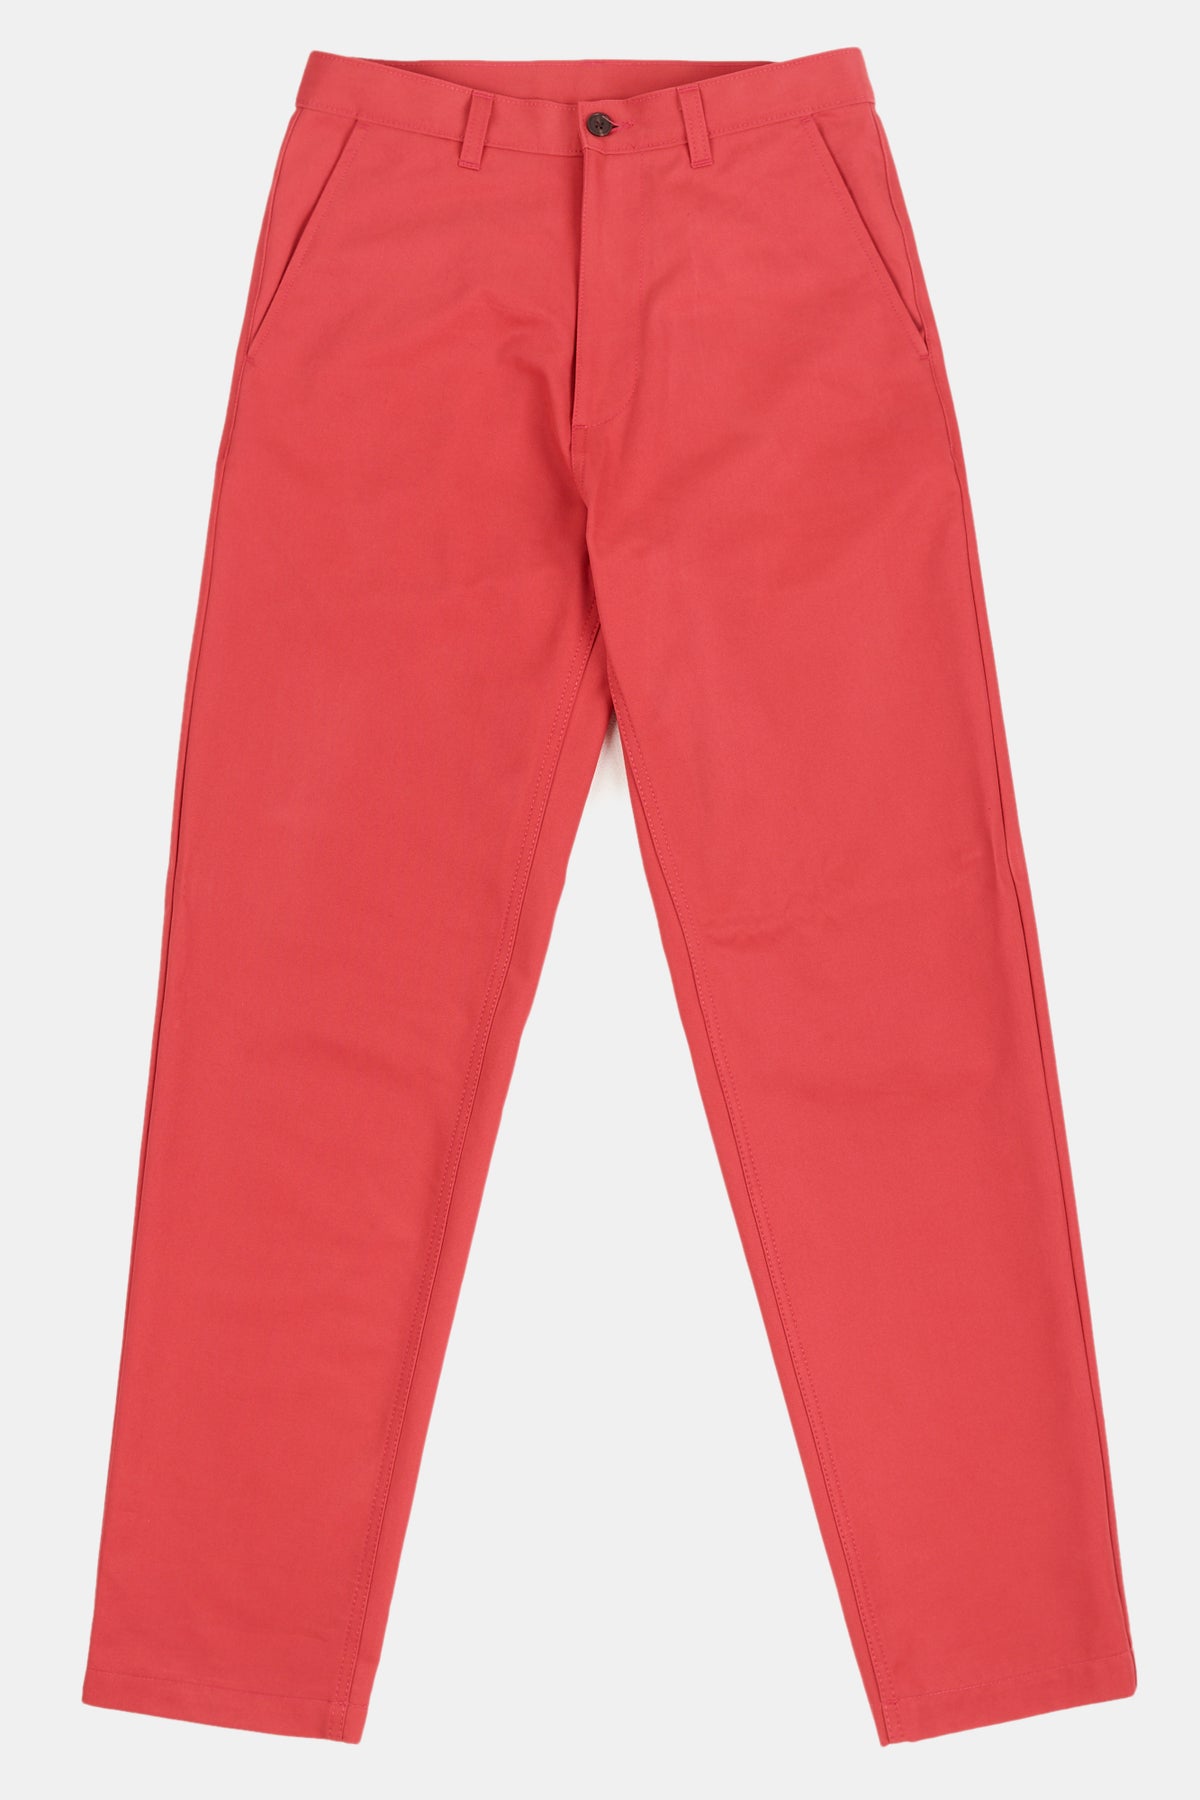 
            Salmon red, heavyweight relaxed chino flat lay